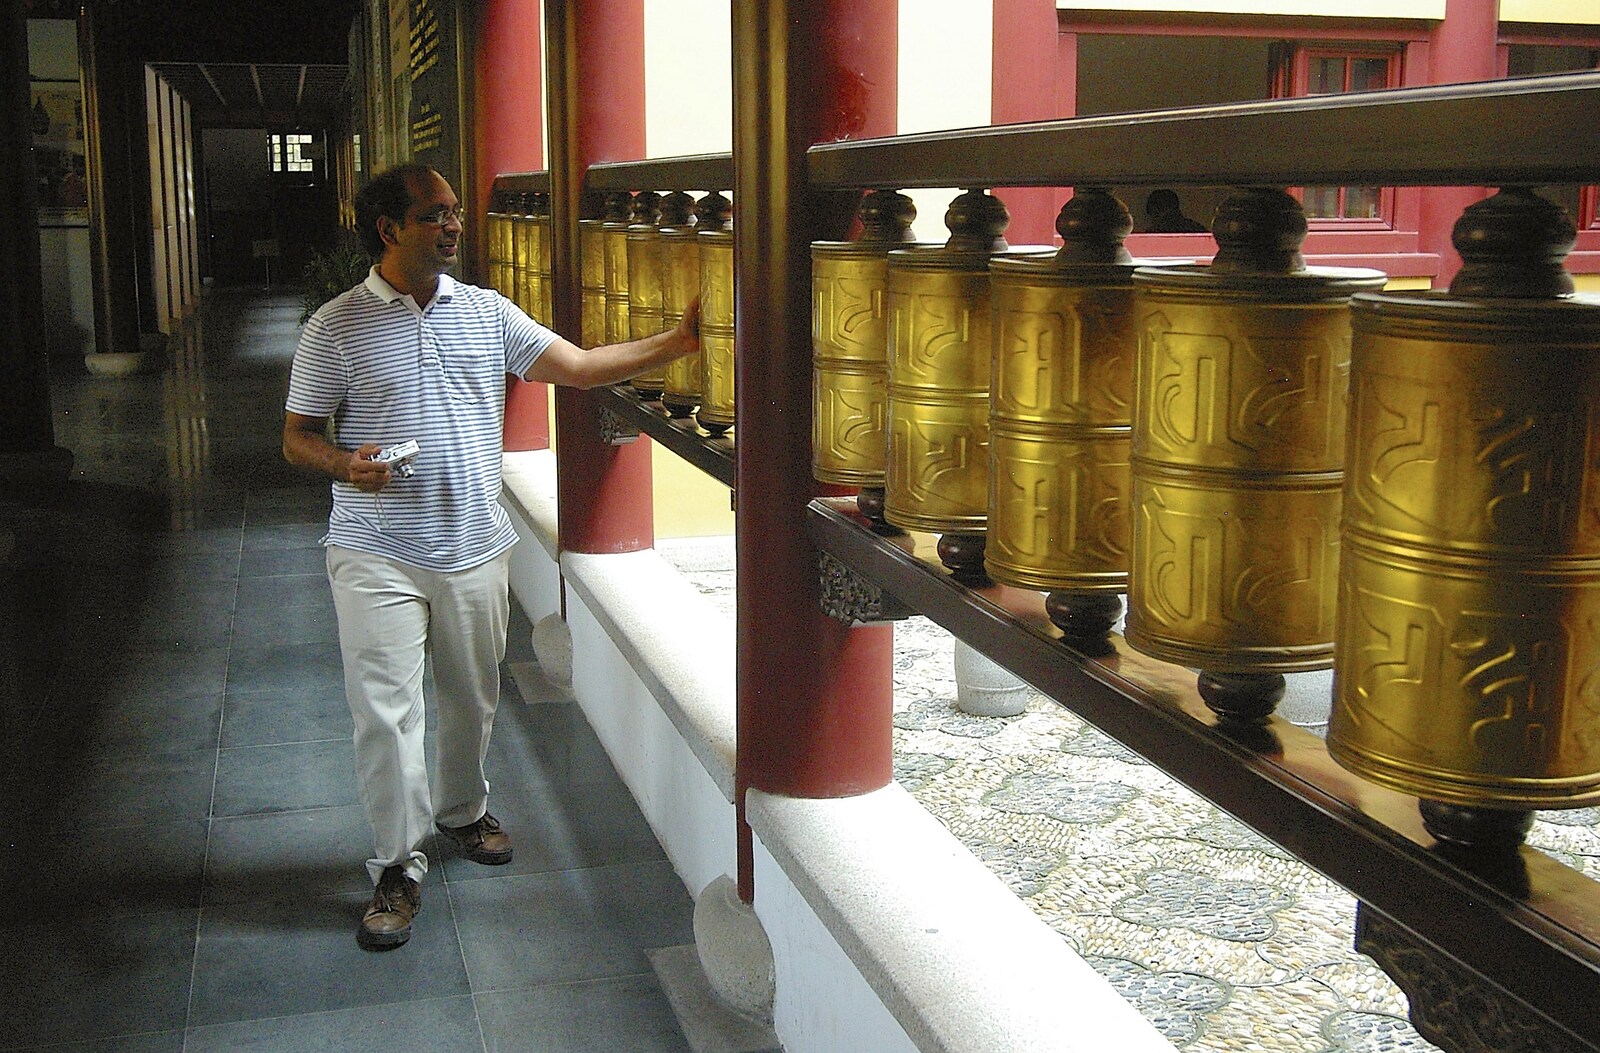 Colleague Ashish spins the Buddhist prayer wheels from A Few Days in Nanjing, Jiangsu Province, China - 7th October 2006